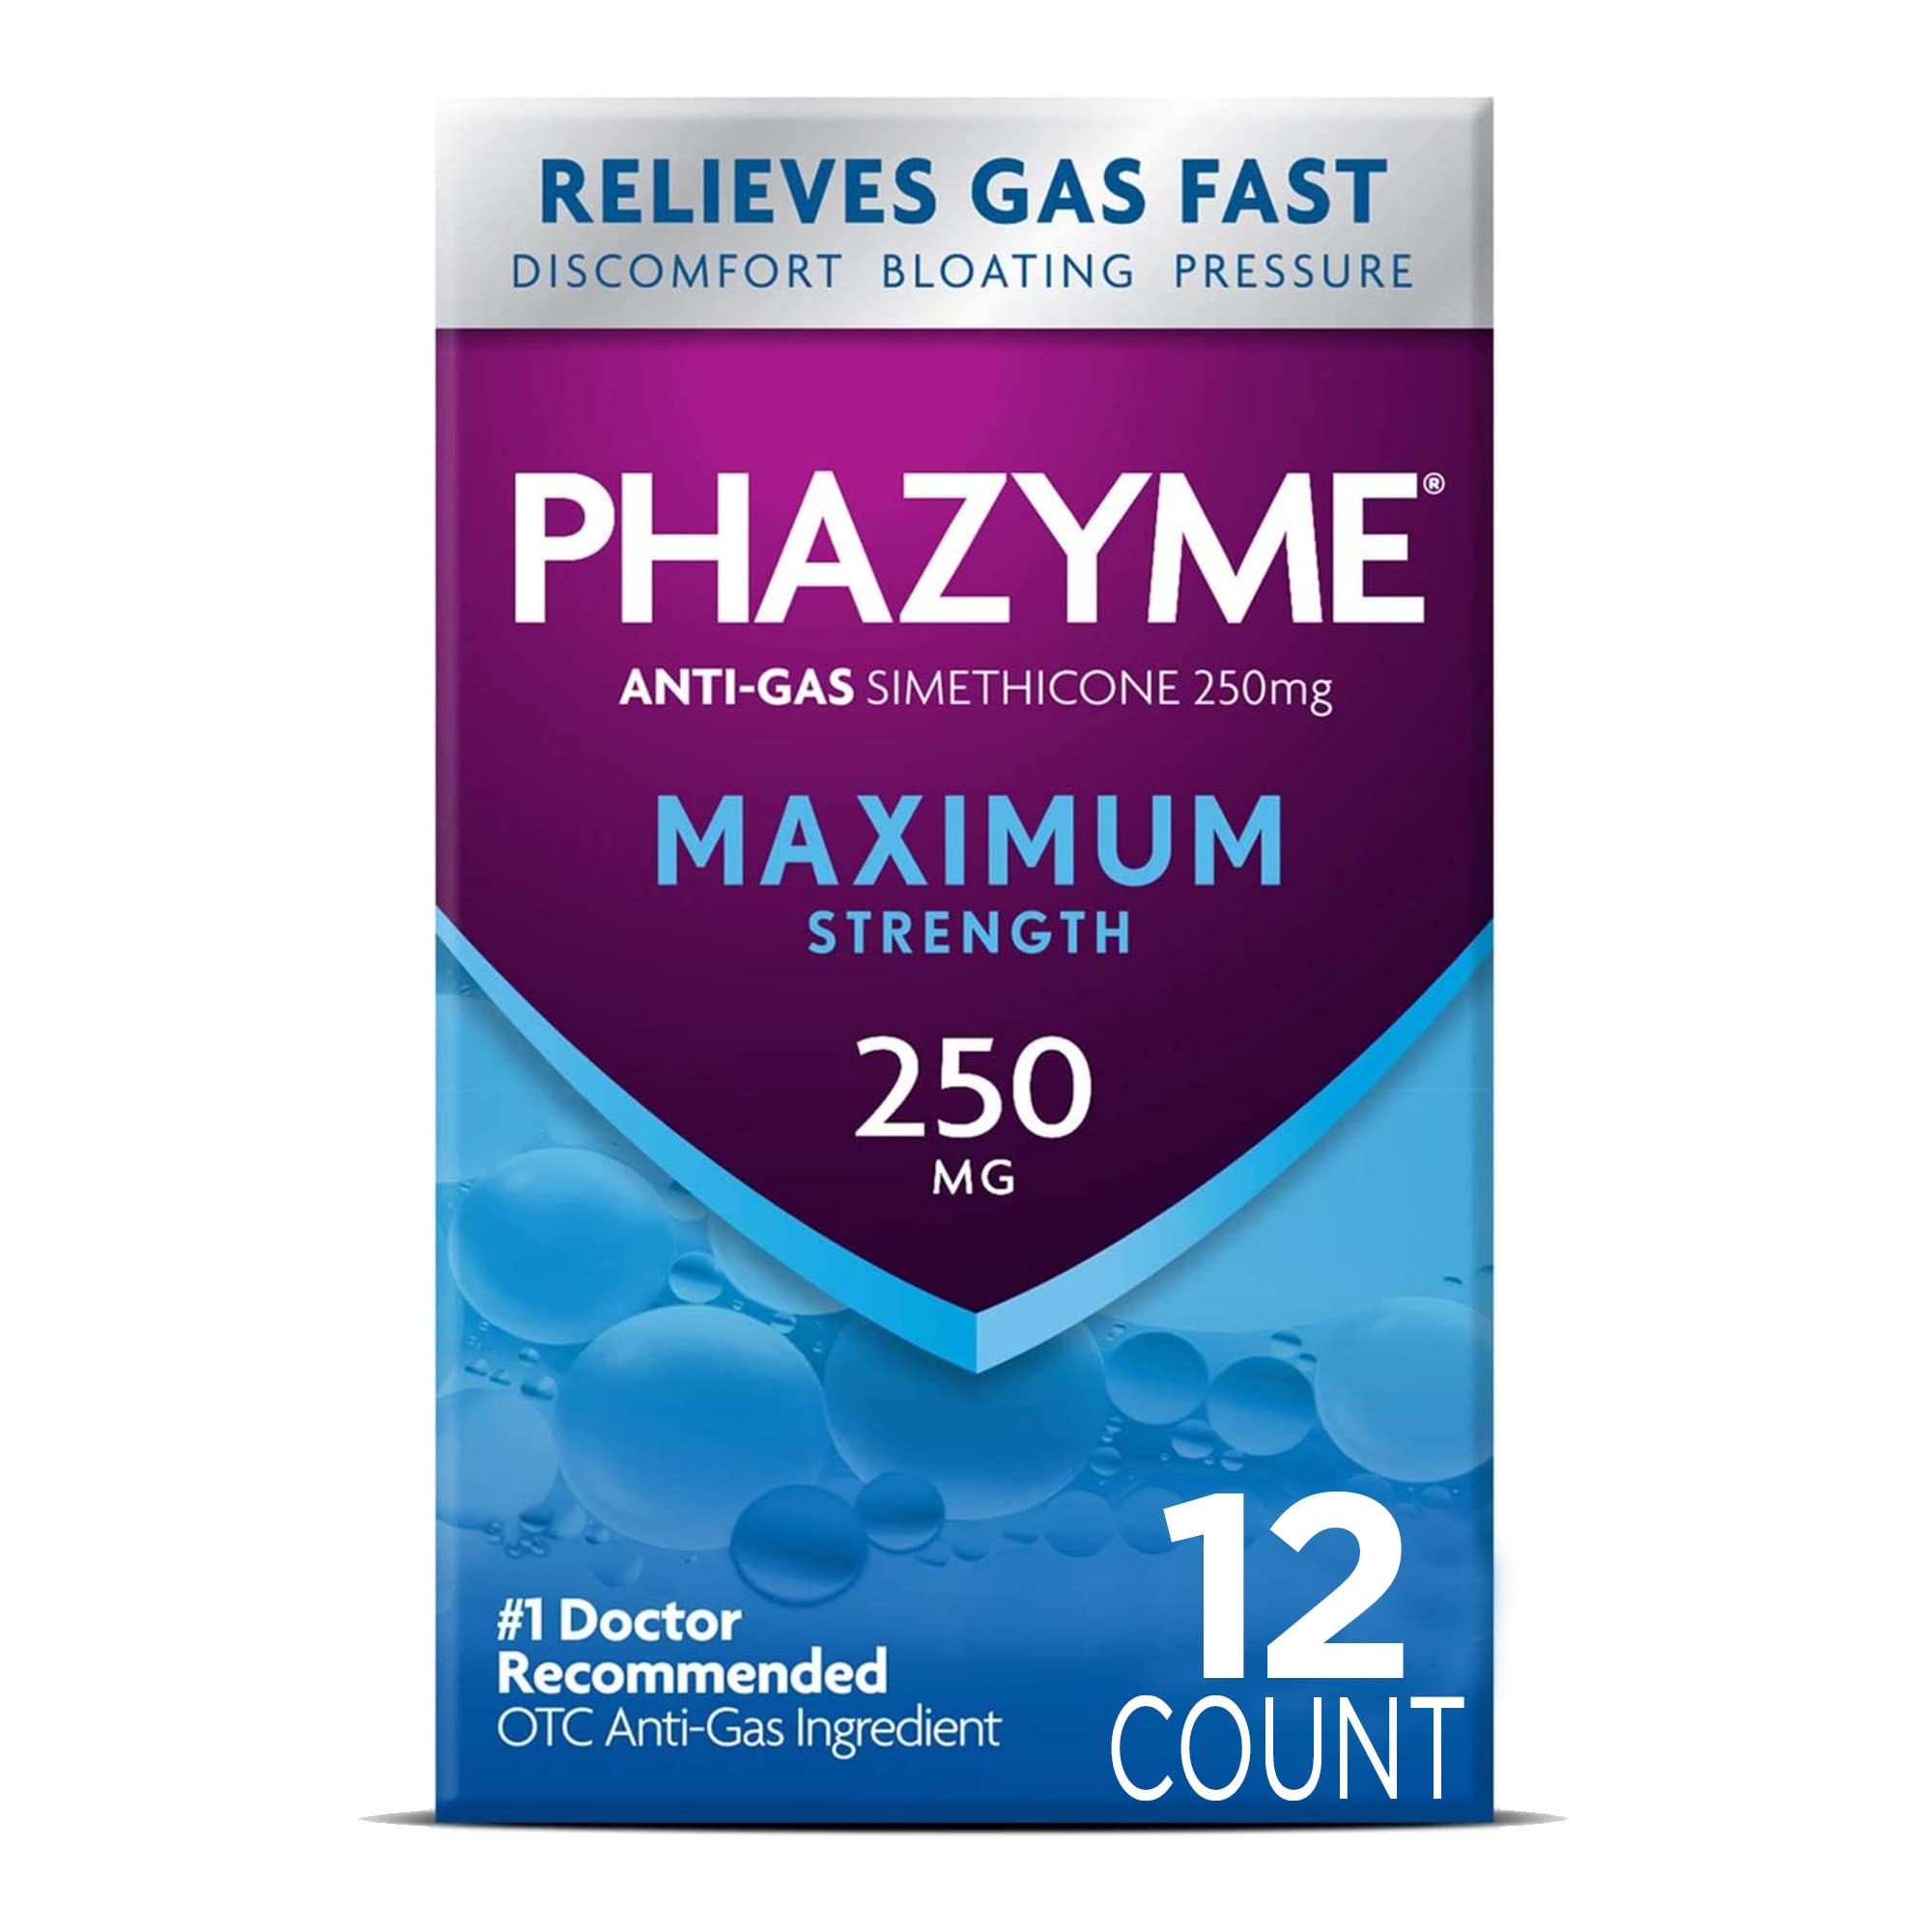 Phazyme Maximum Strength Gas and Bloating Relief, 250 mg Simethicone, 12 Fast Gels